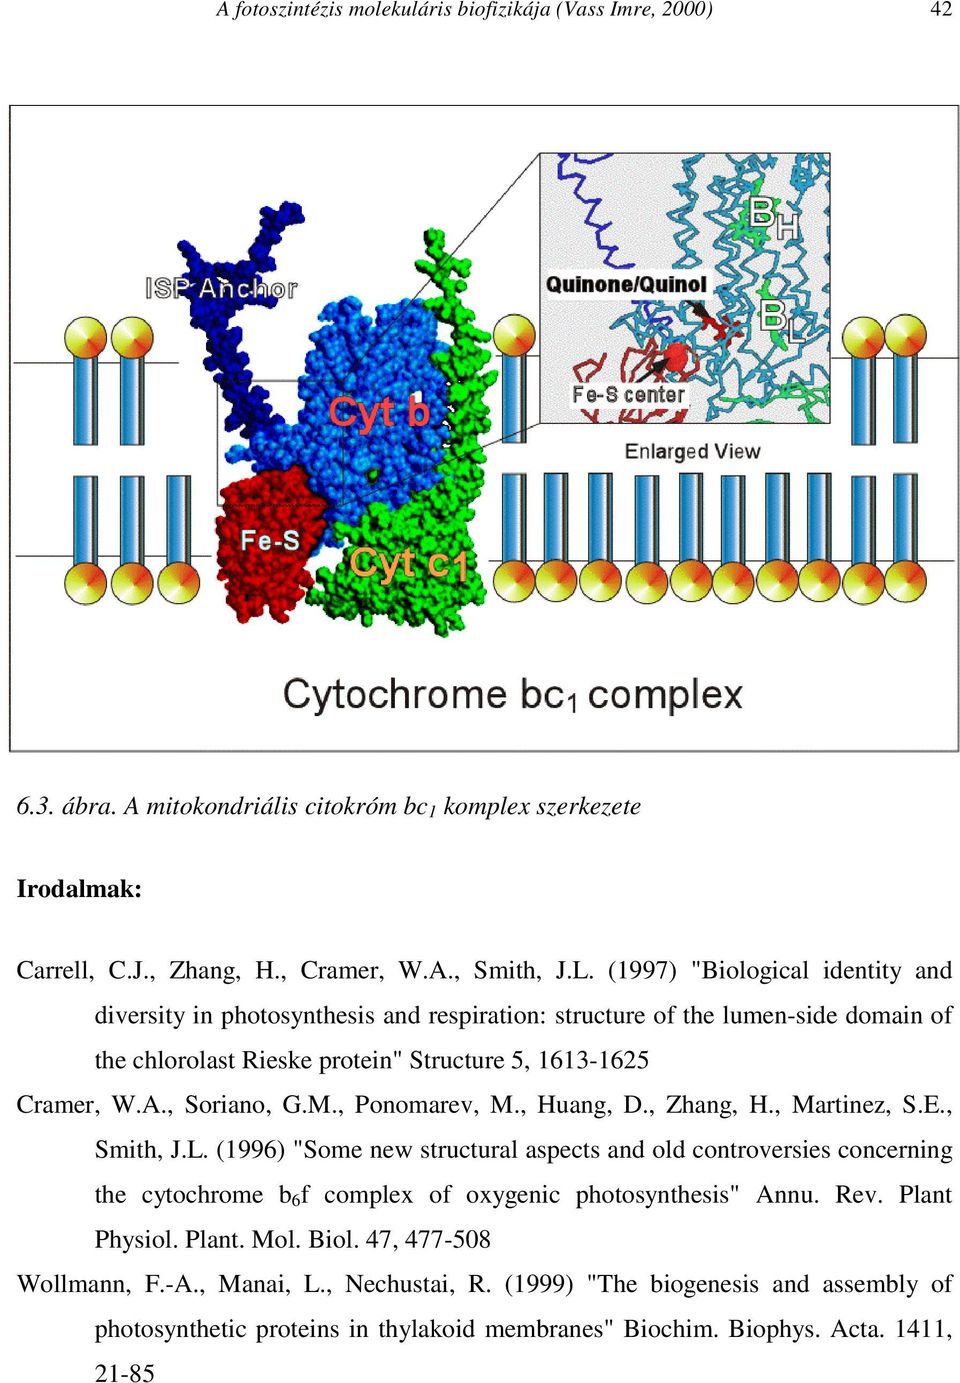 , Ponomarev, M., Huang, D., Zhang, H., Martinez, S.E., Smith, J.L. (1996) "Some new structural aspects and old controversies concerning the cytochrome b 6 f complex of oxygenic photosynthesis" Annu.